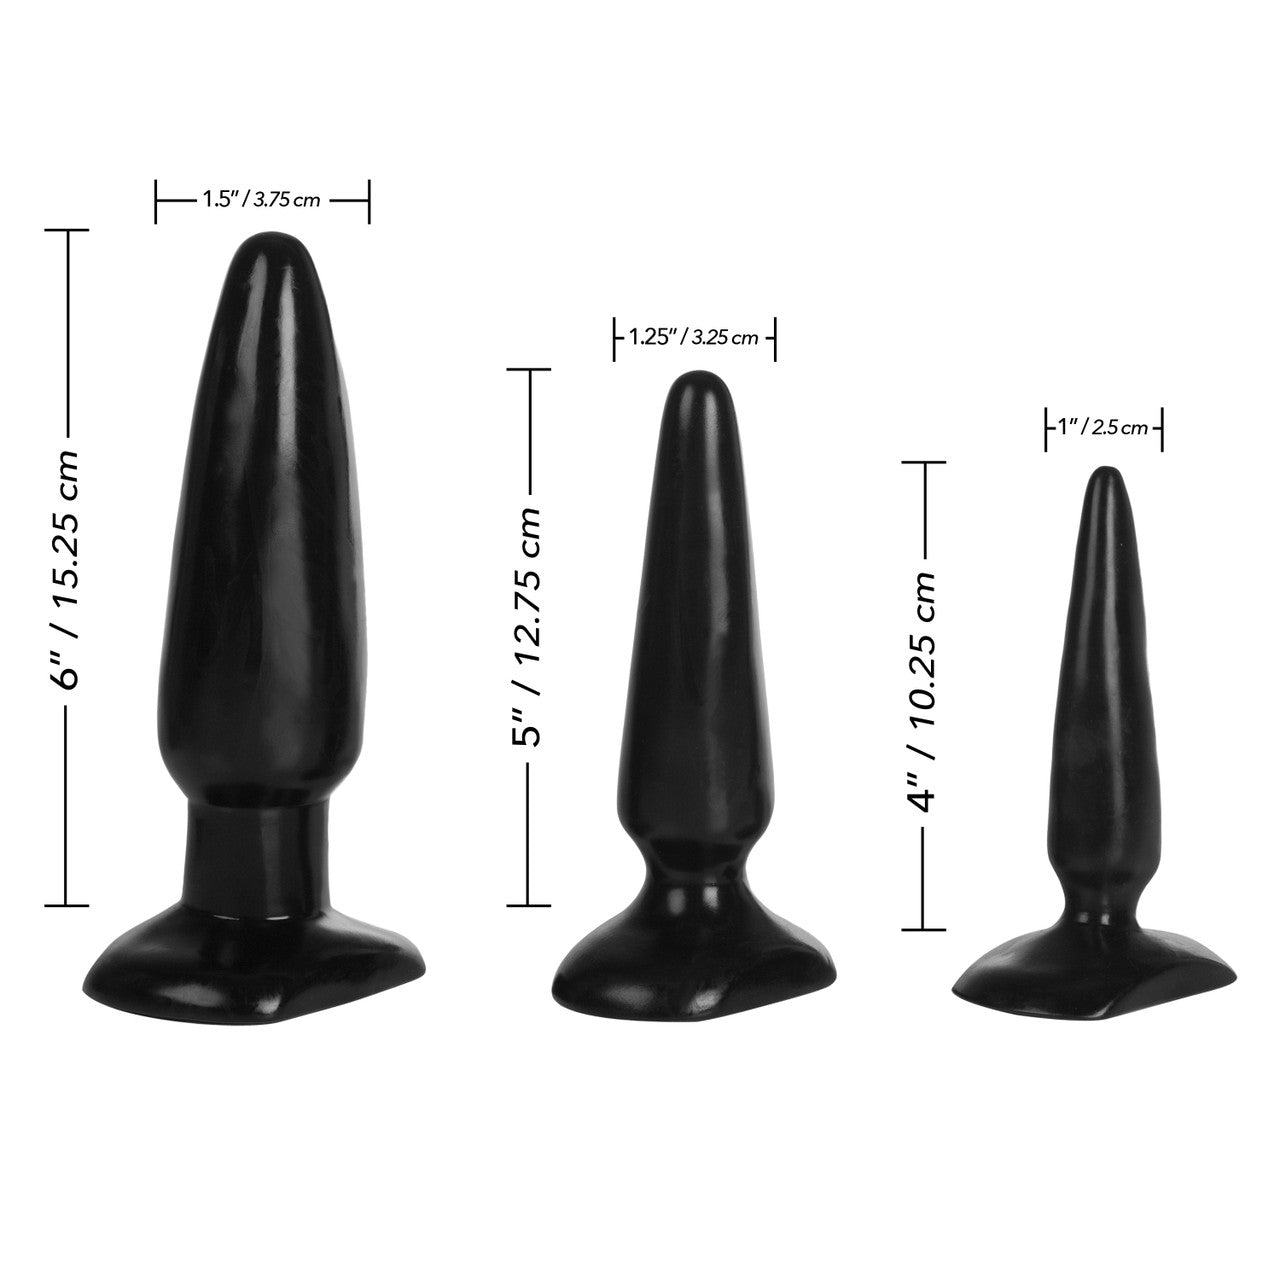 Colt Anal Trainer Kit - Thorn & Feather Sex Toy Canada